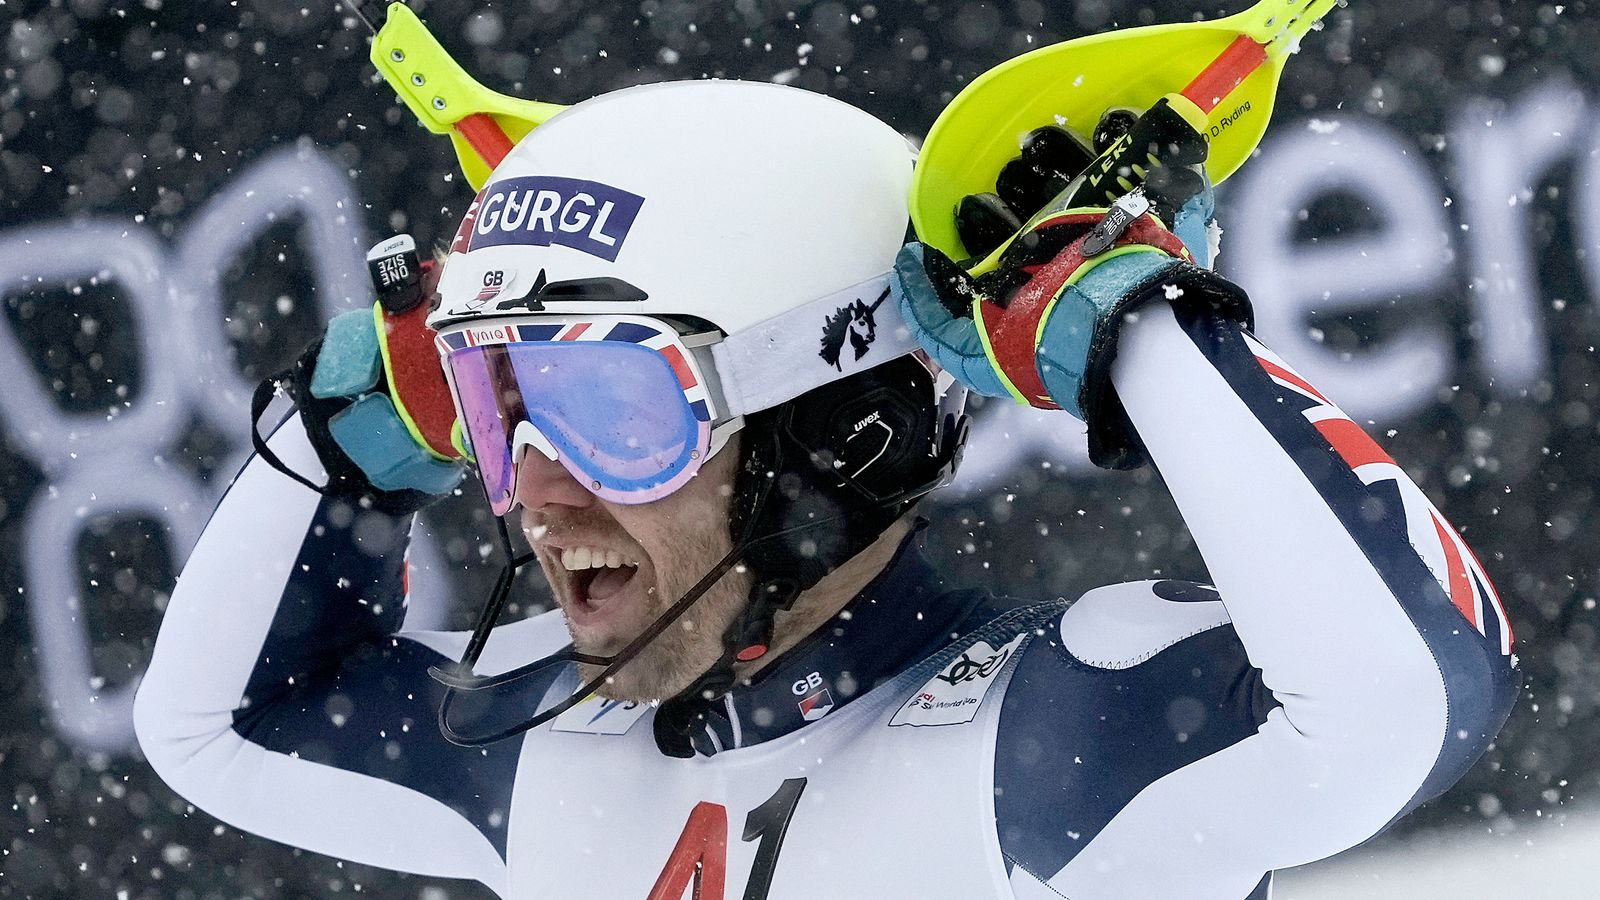 Skier Dave Ryding makes history to win Britain's first gold in alpine skiing World Cup - Sky News